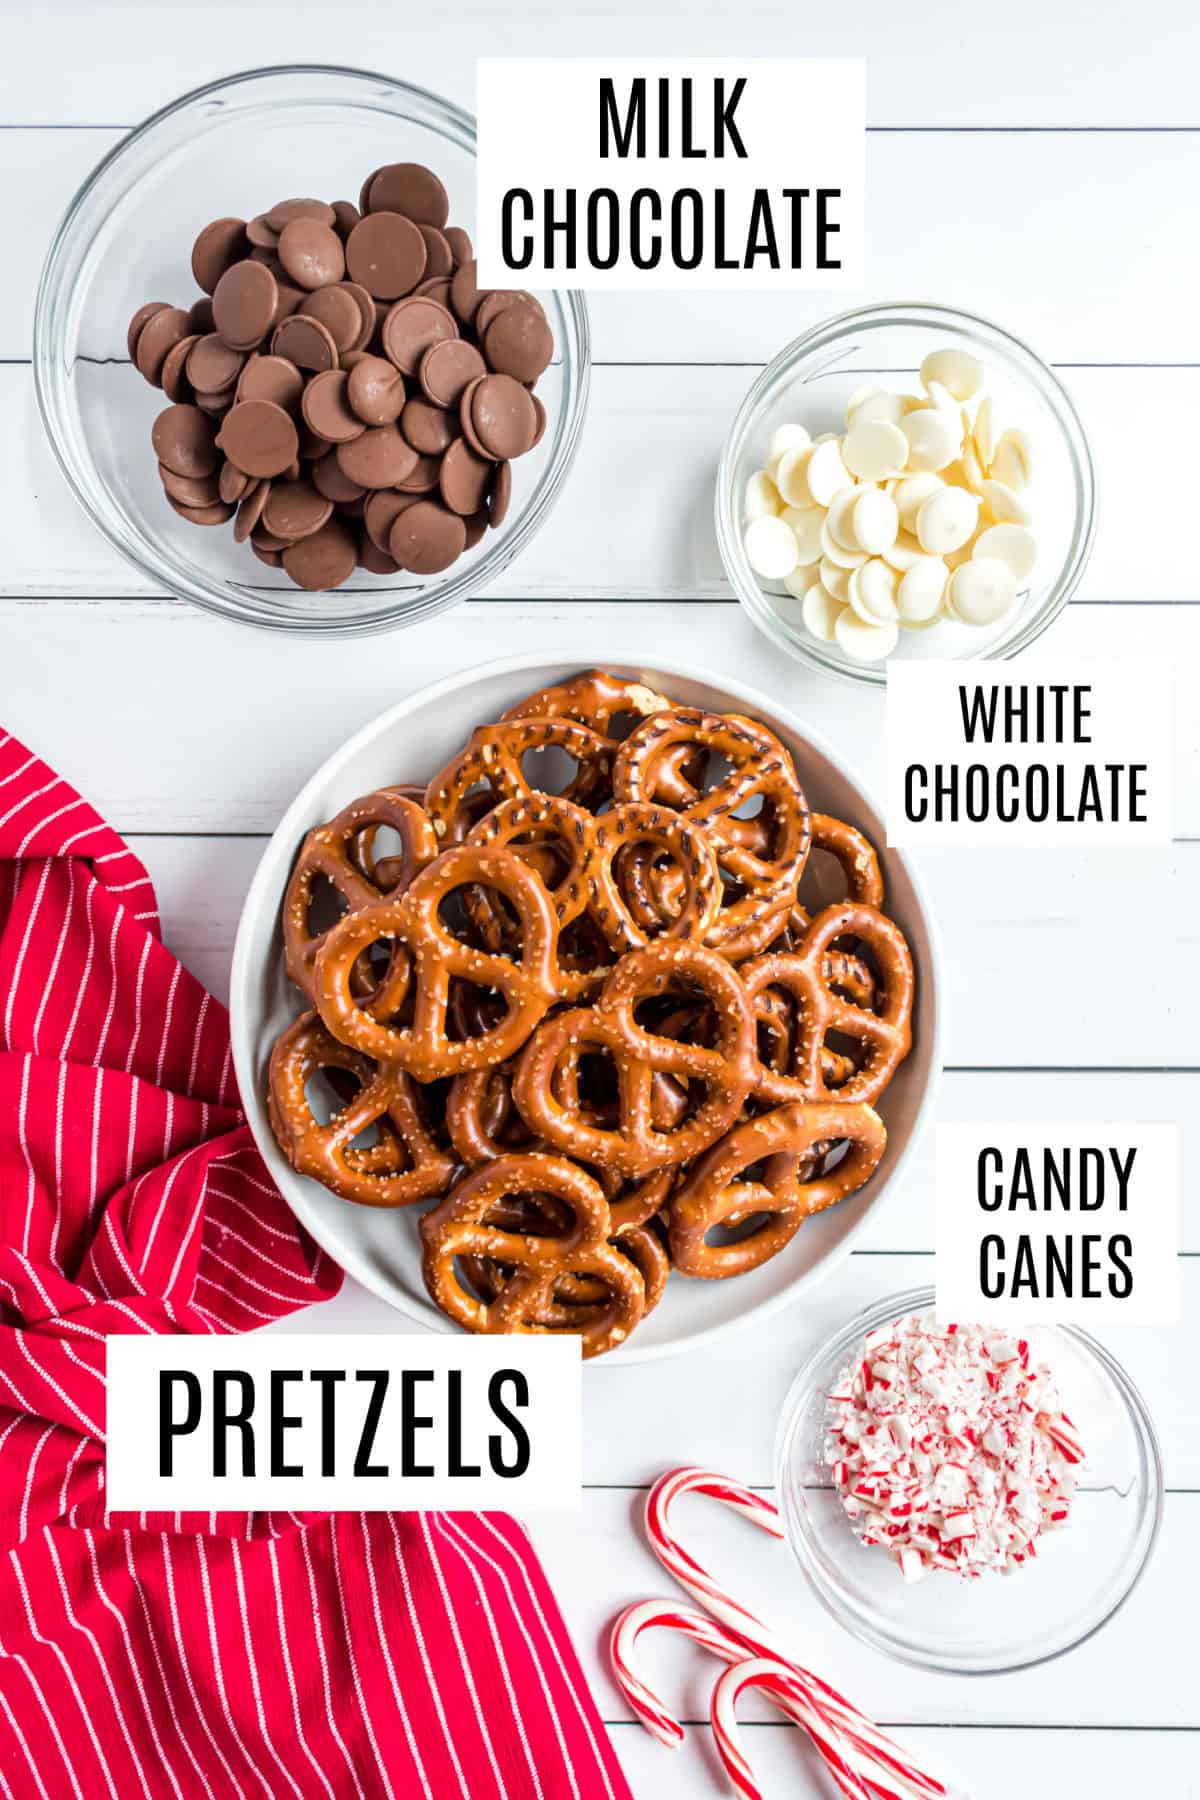 Ingredients needed to make chocolate covered pretzels.